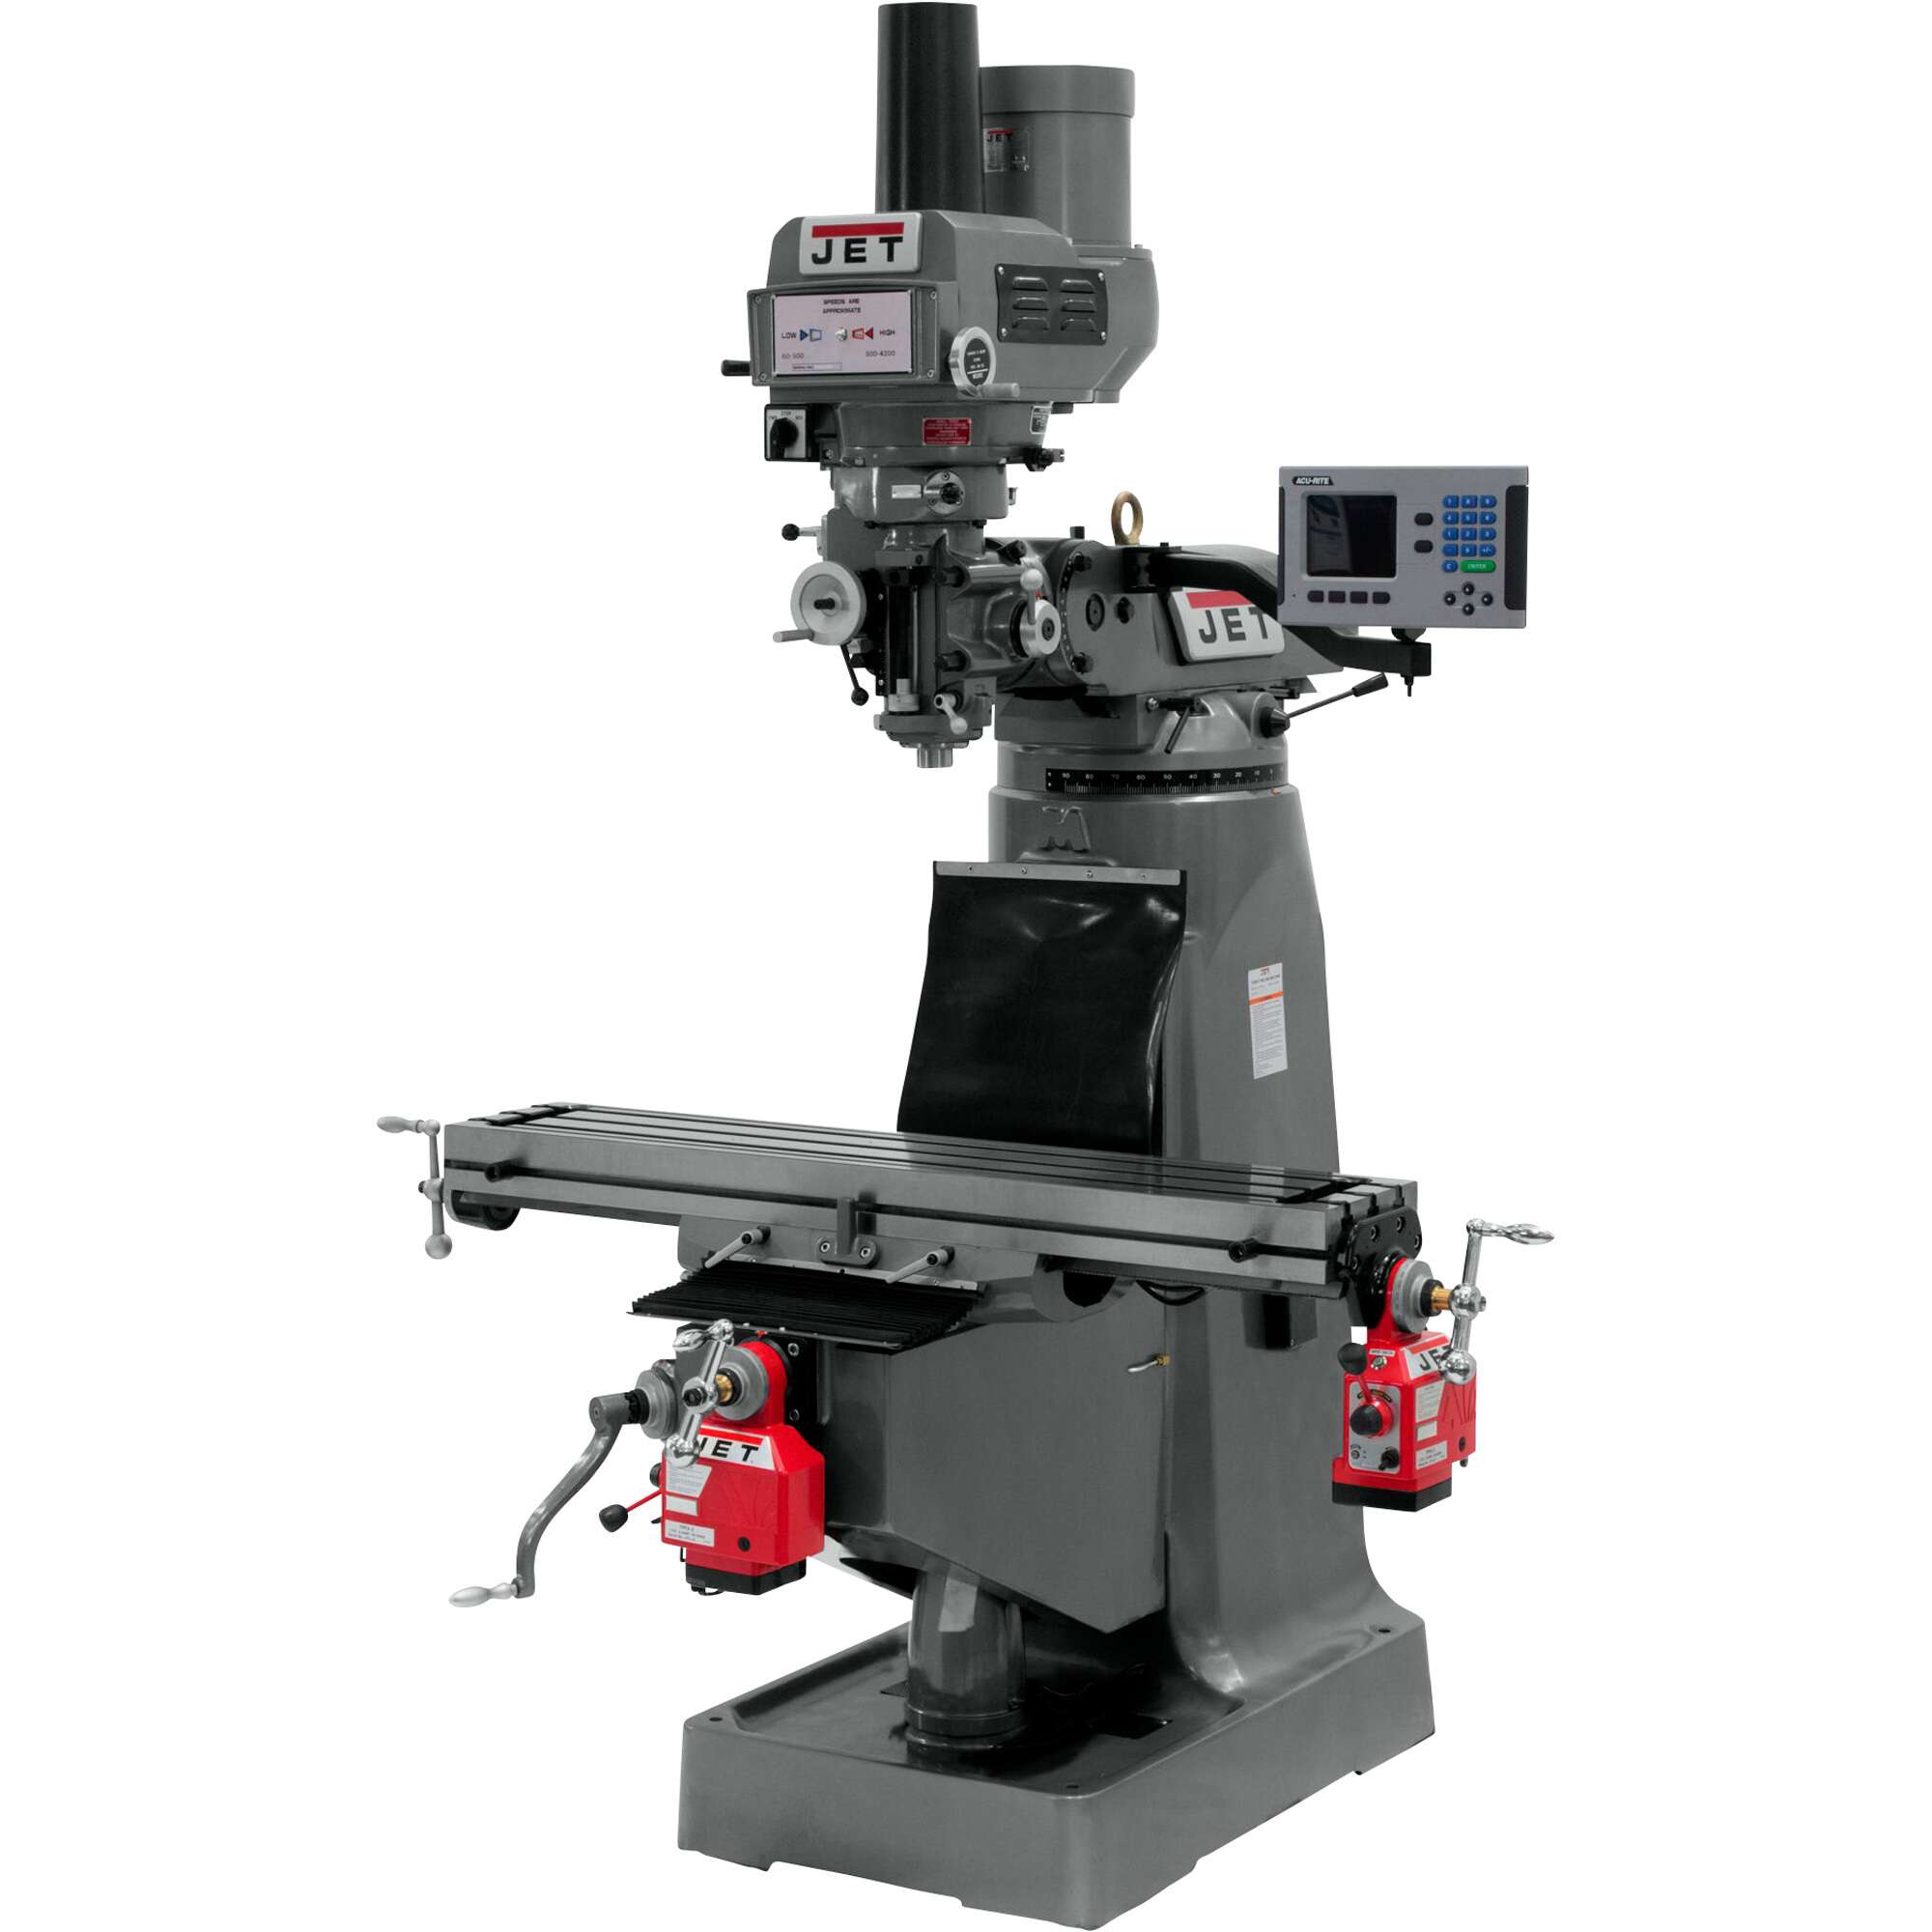 JET Variable Speed Milling Machine with ACU RITE 203 DRO X and Y Axis Powerfeeds and Power Draw Bar 9in x 49in 230 Volt 3 Phase